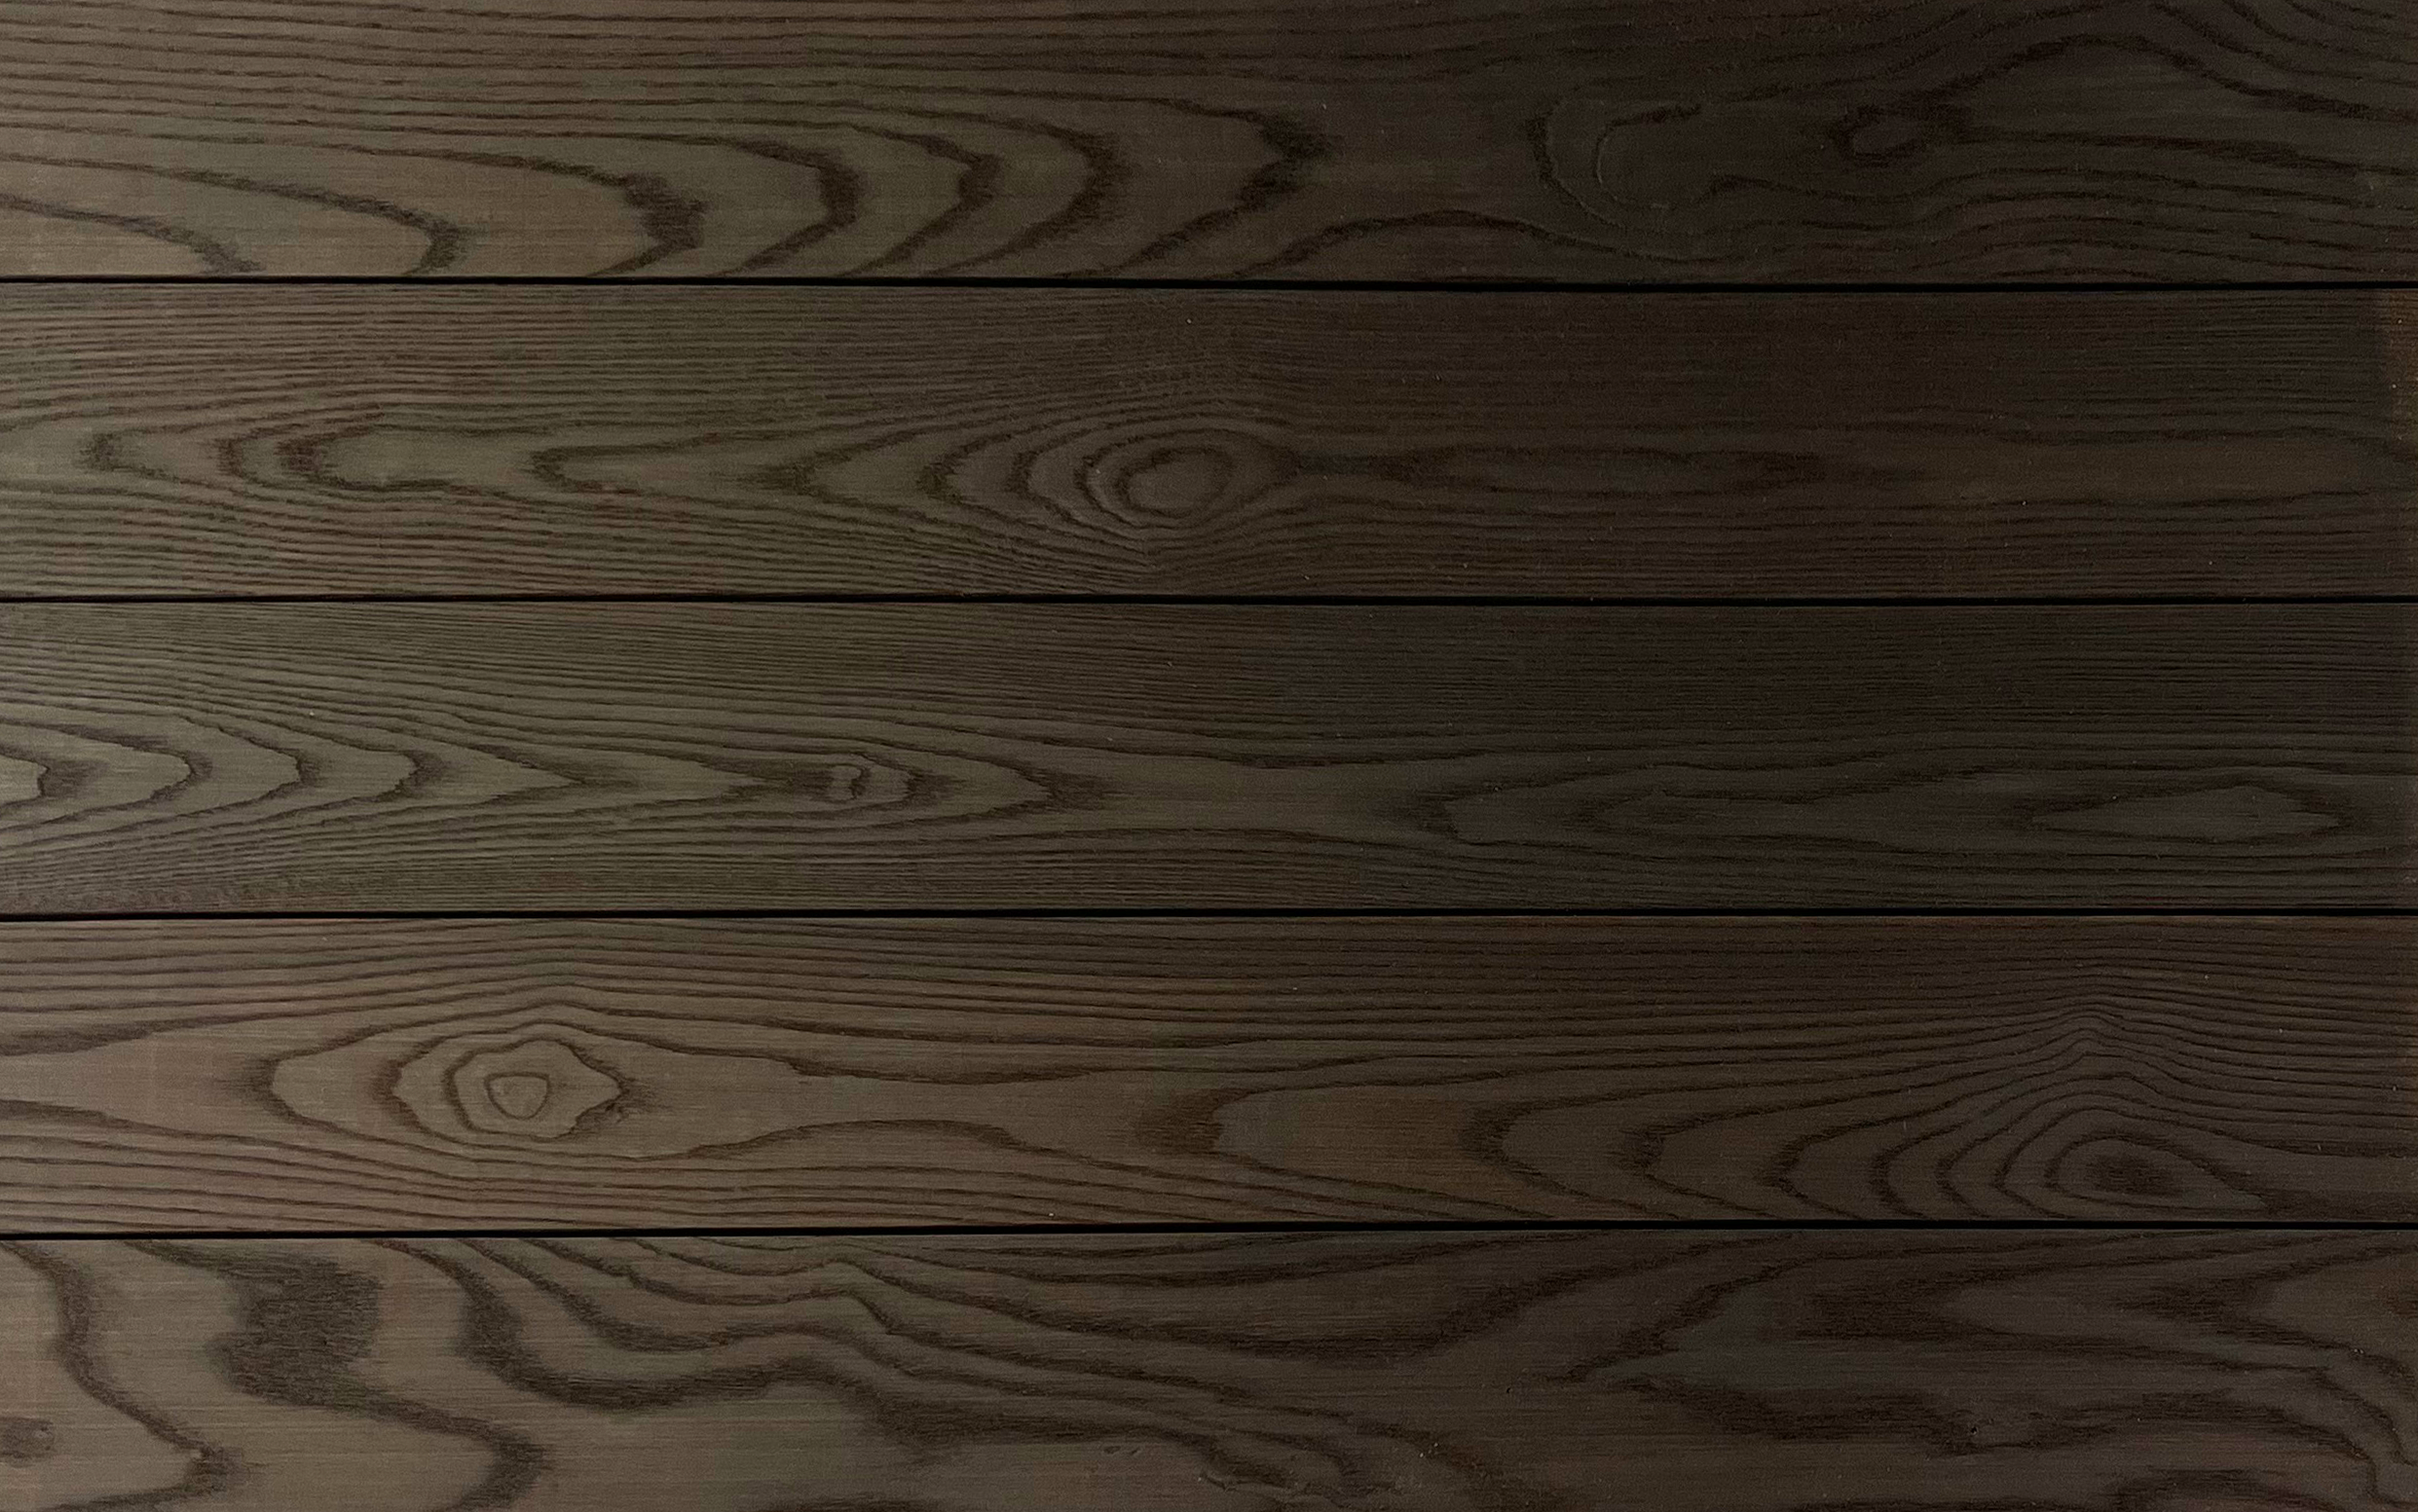 Thermally modified wood cladding